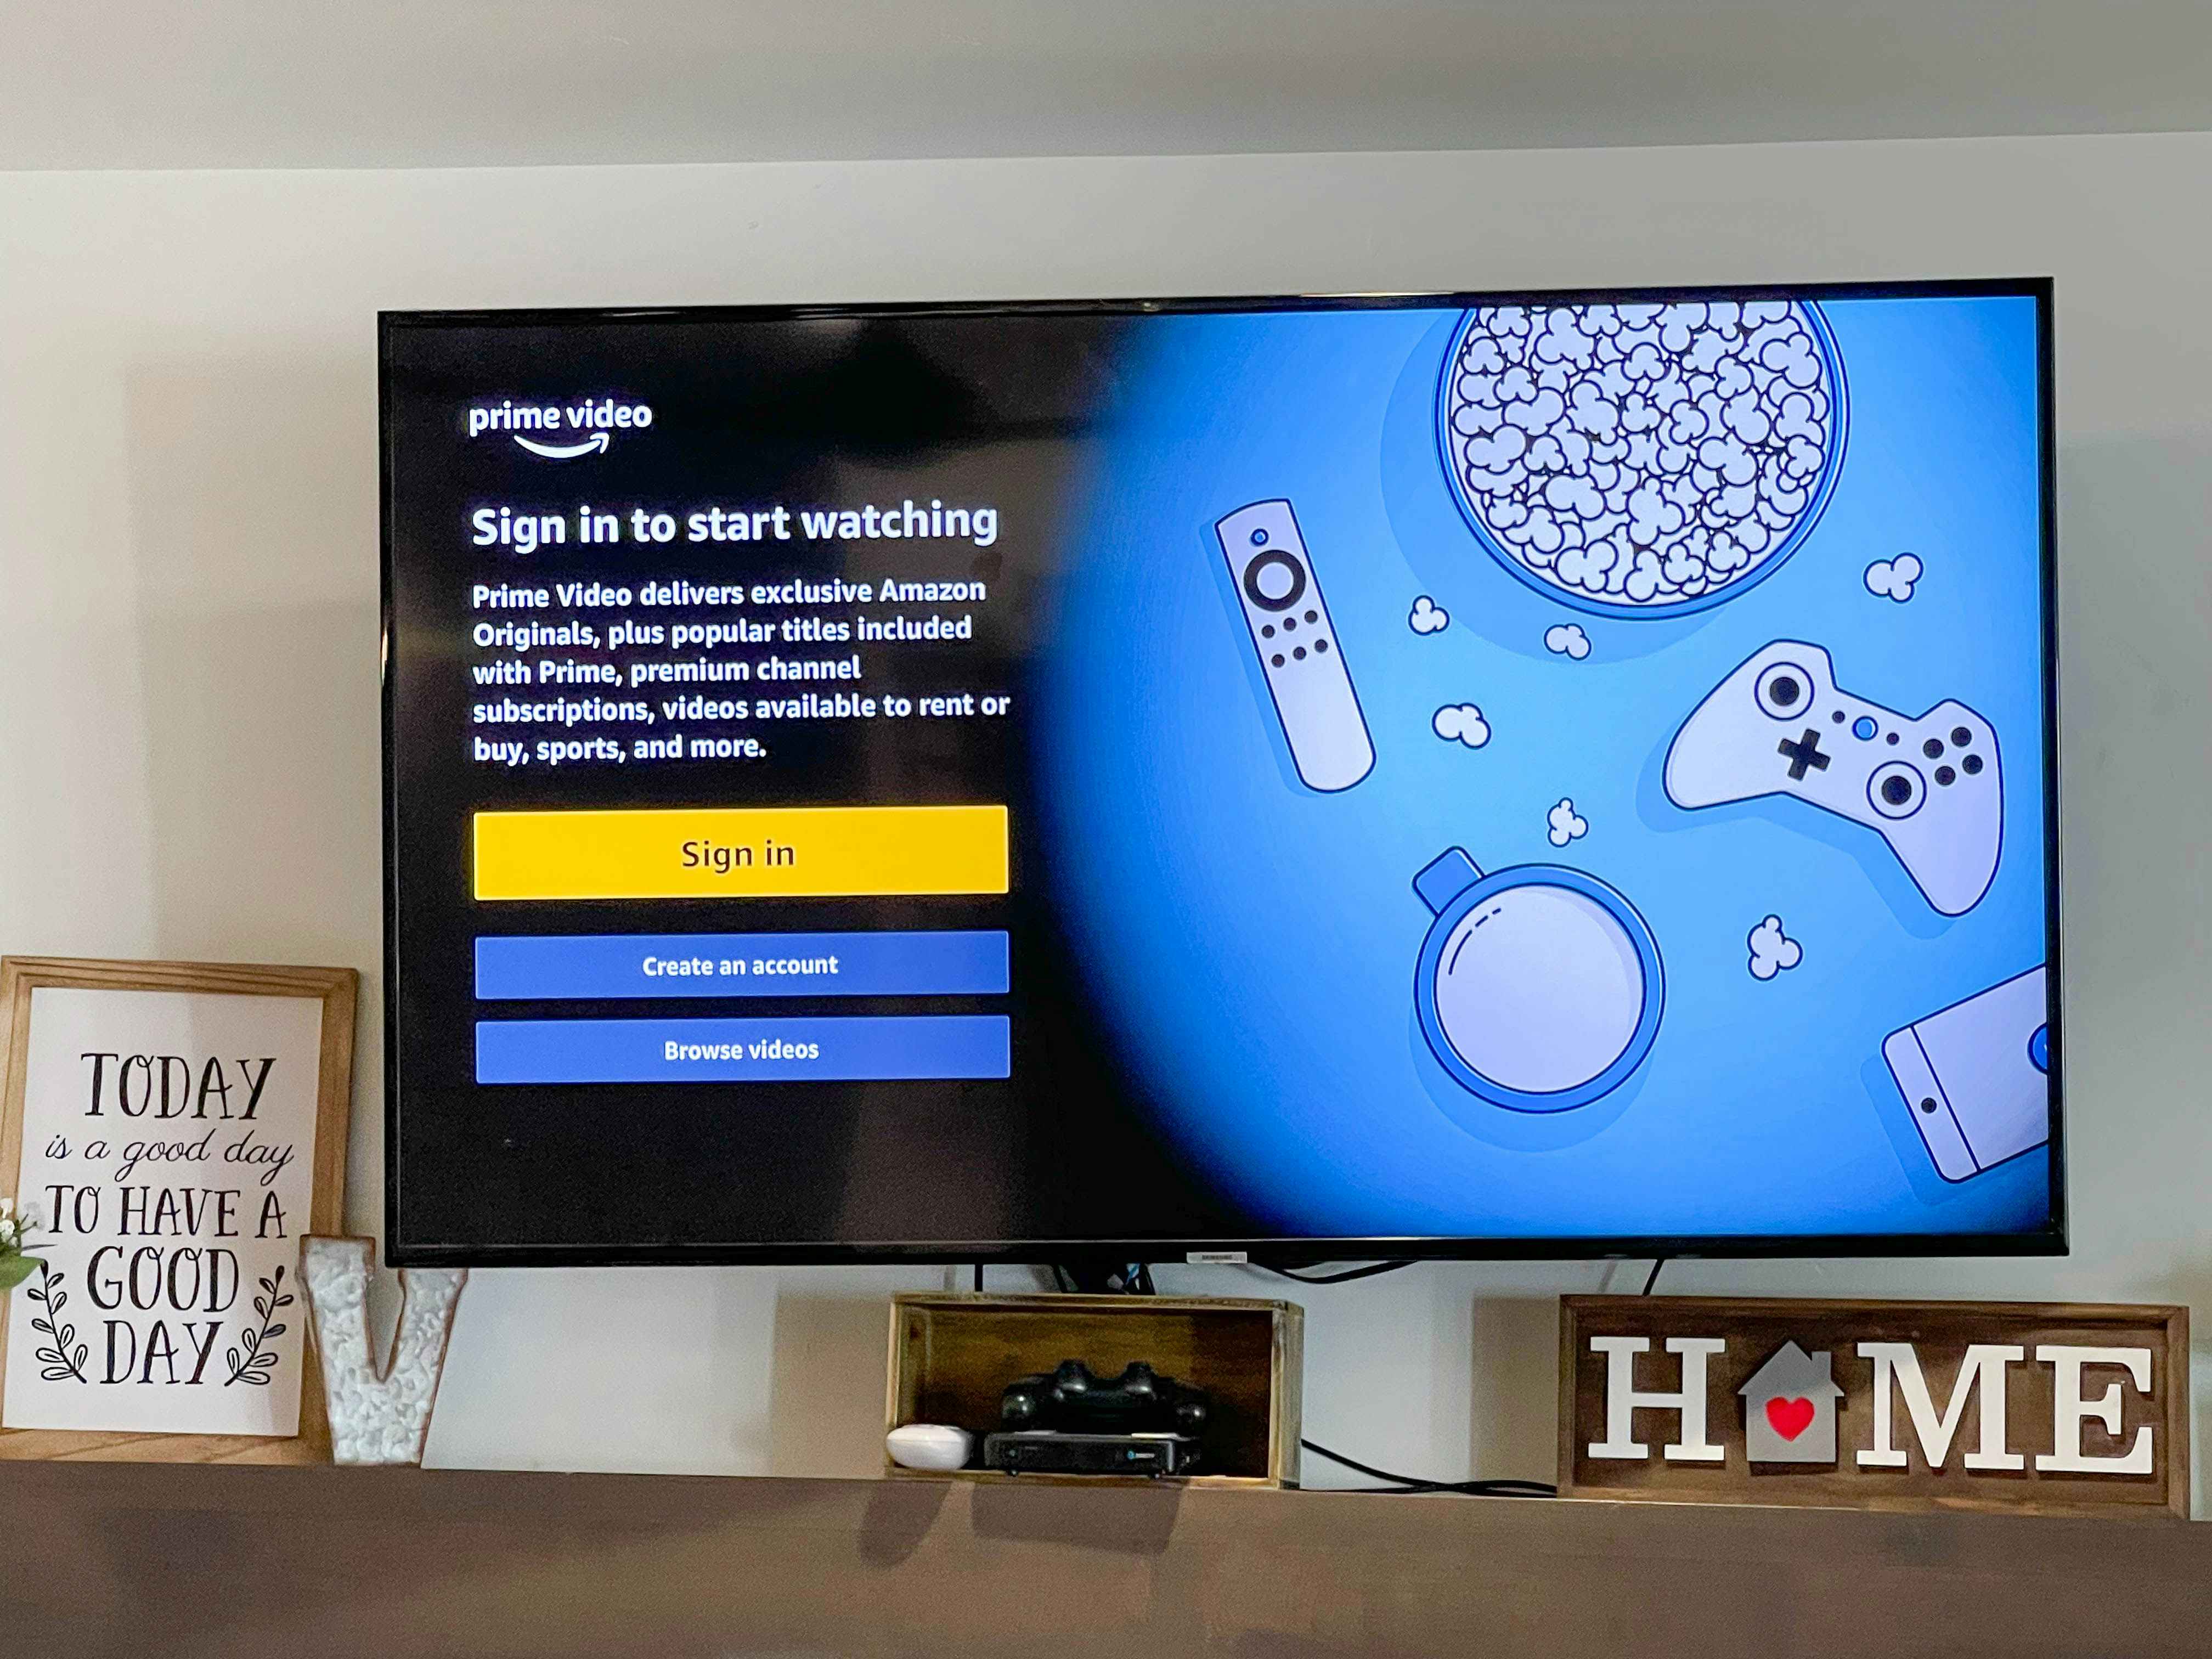 Amazon prime video sign-in screen on a TV.